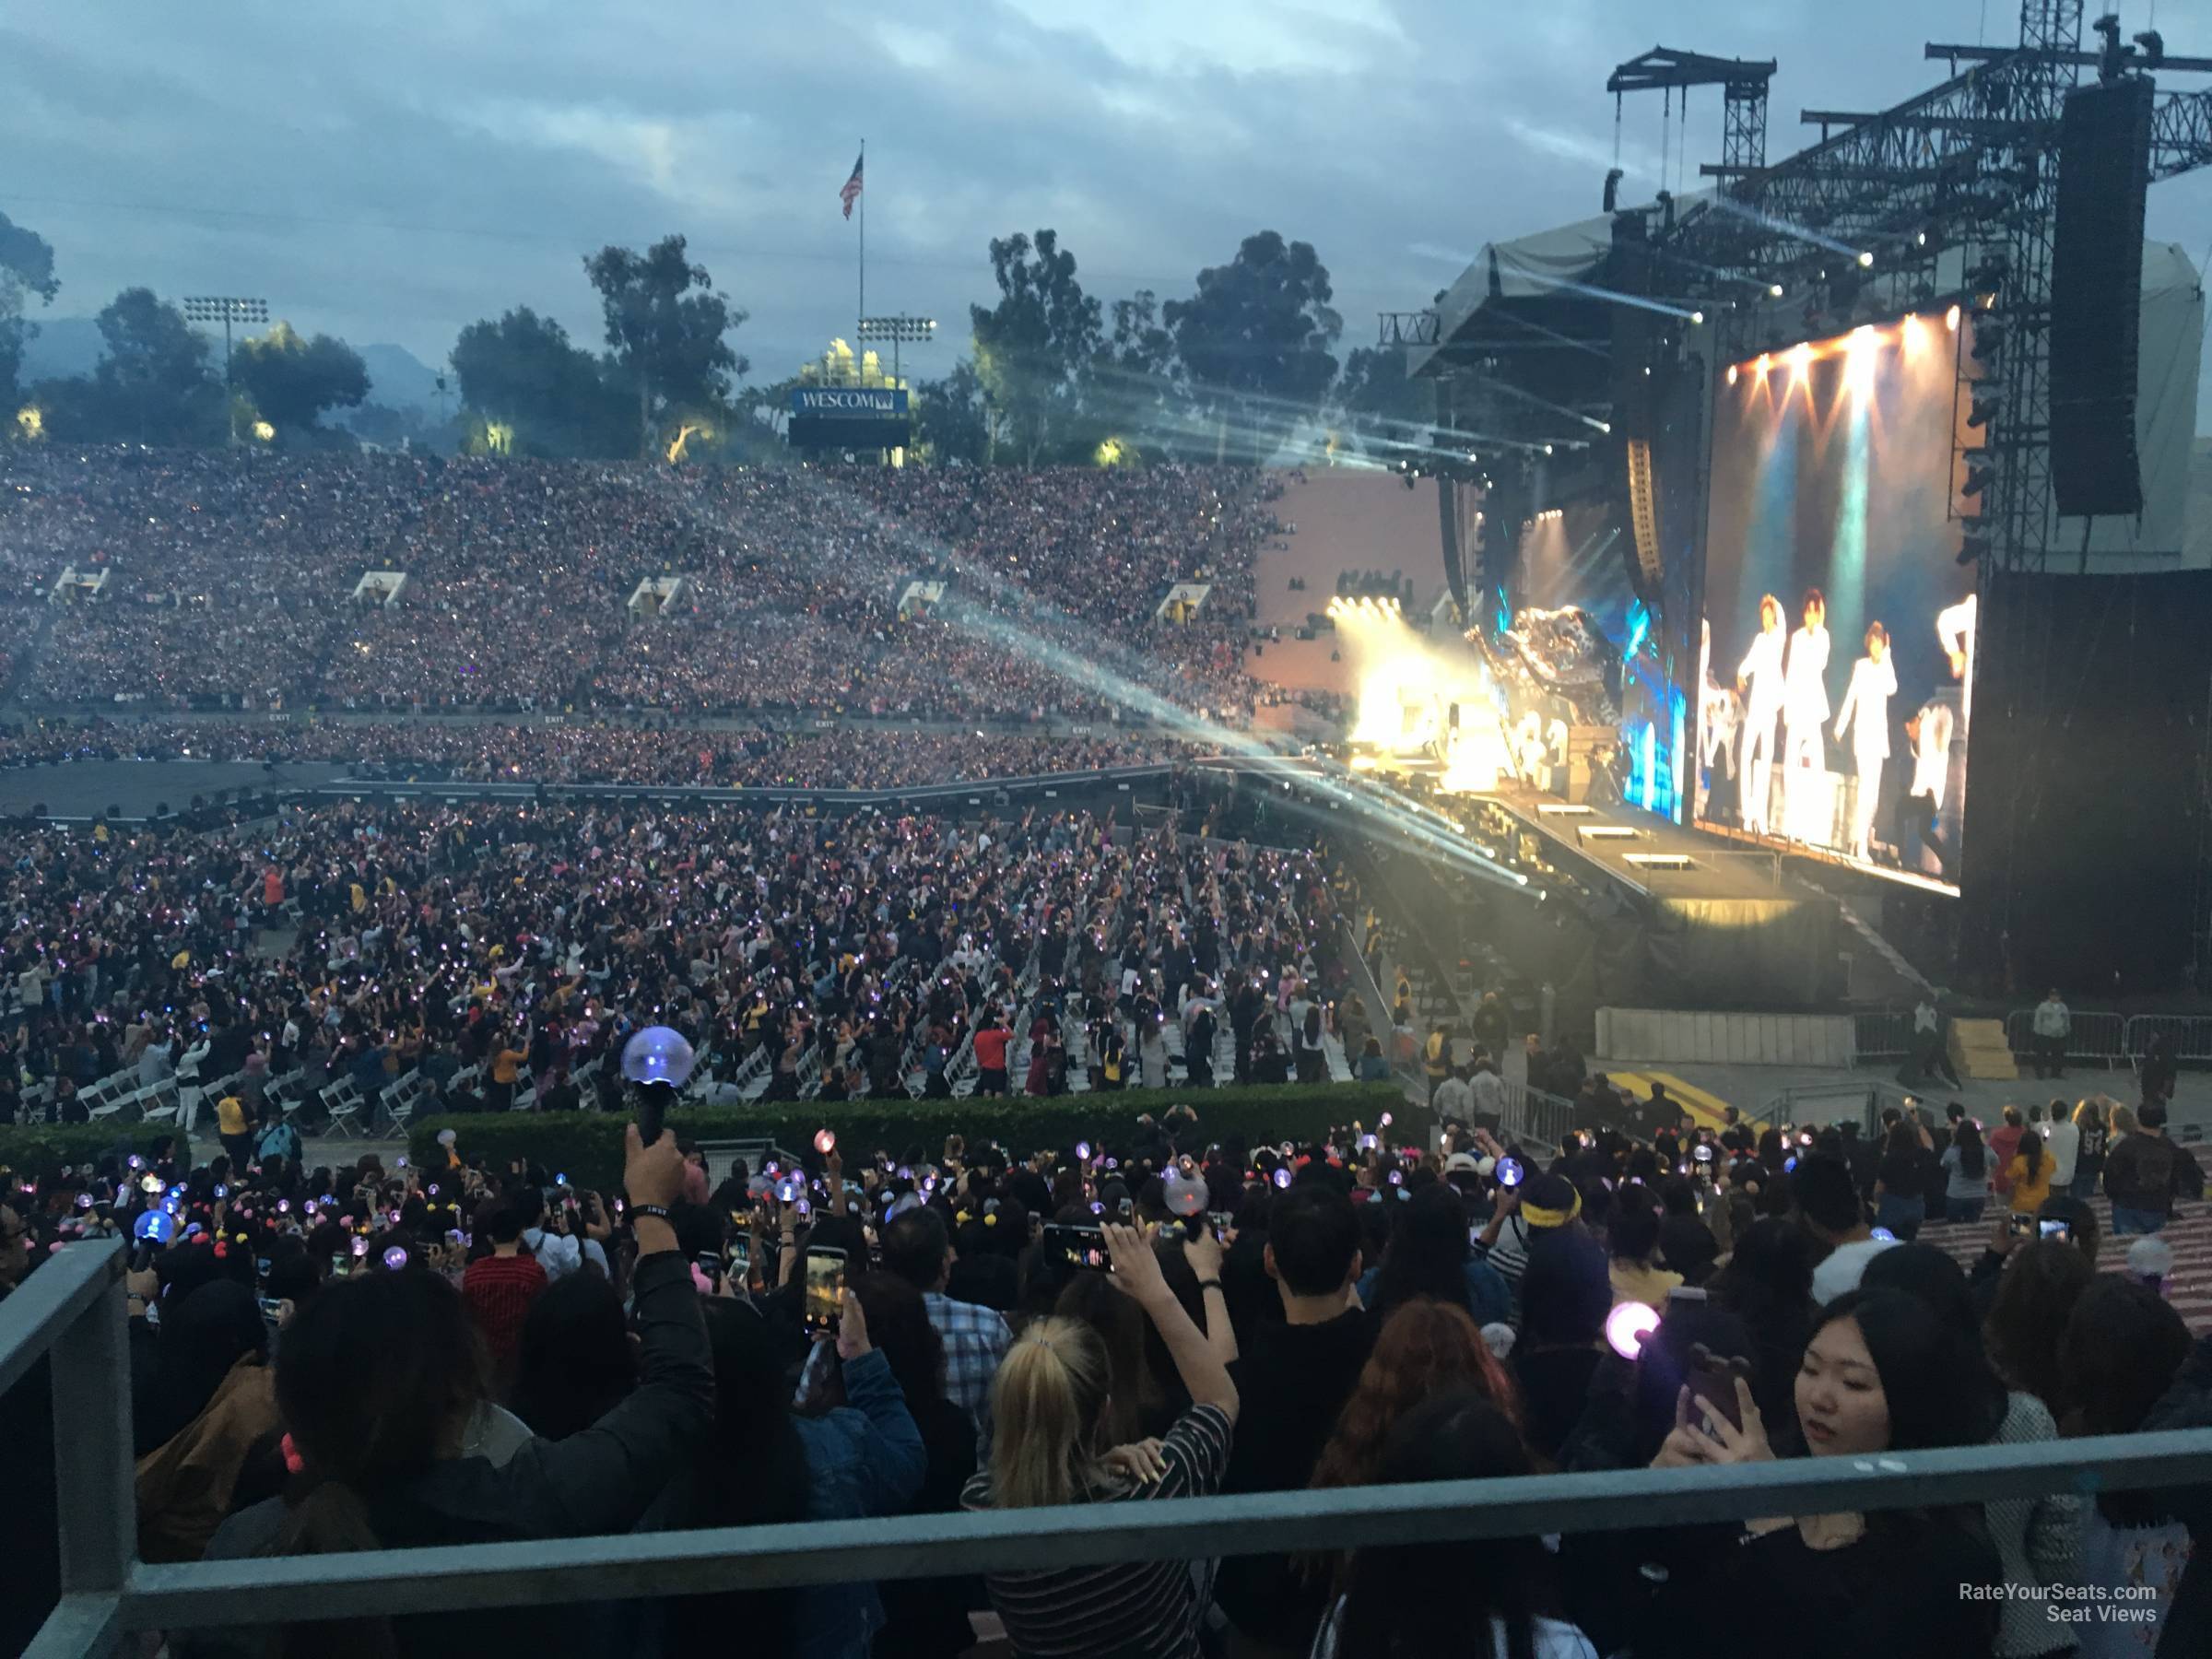 section 21, row 30 seat view  for concert - rose bowl stadium